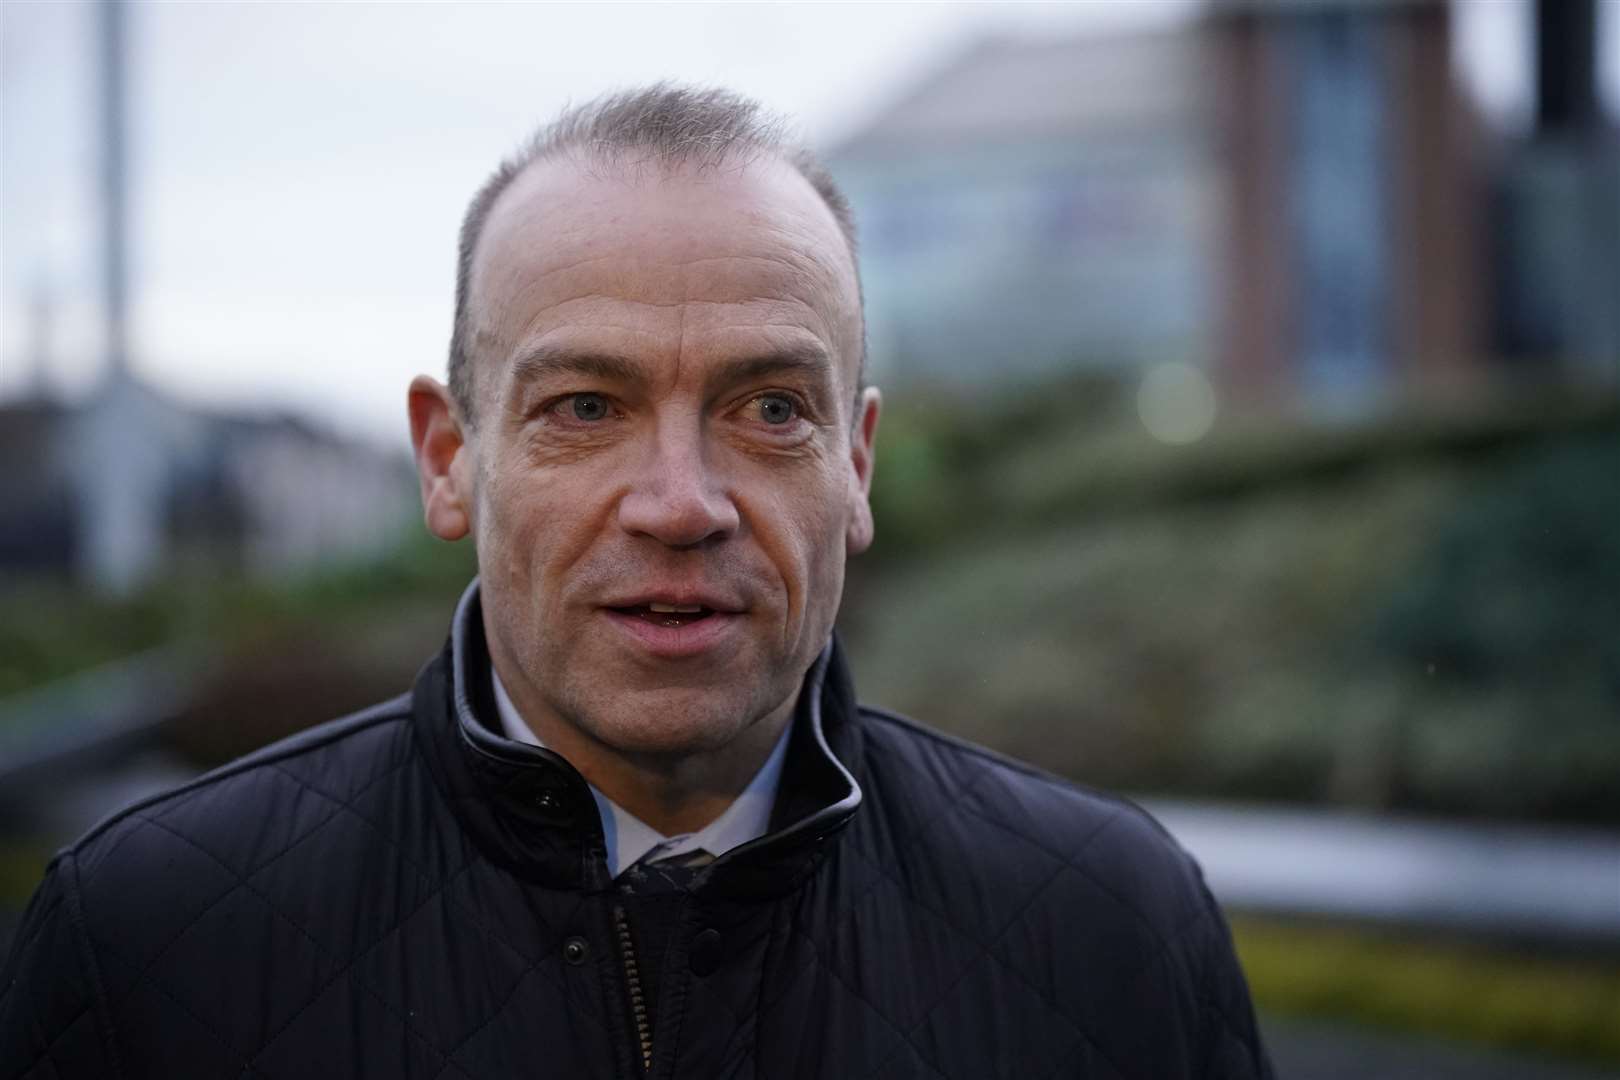 Northern Ireland Secretary Chris Heaton-Harris confirmed a 27.5% pay cut for Stormont Assembly members will come into force from January 1 (Niall Carson/PA)